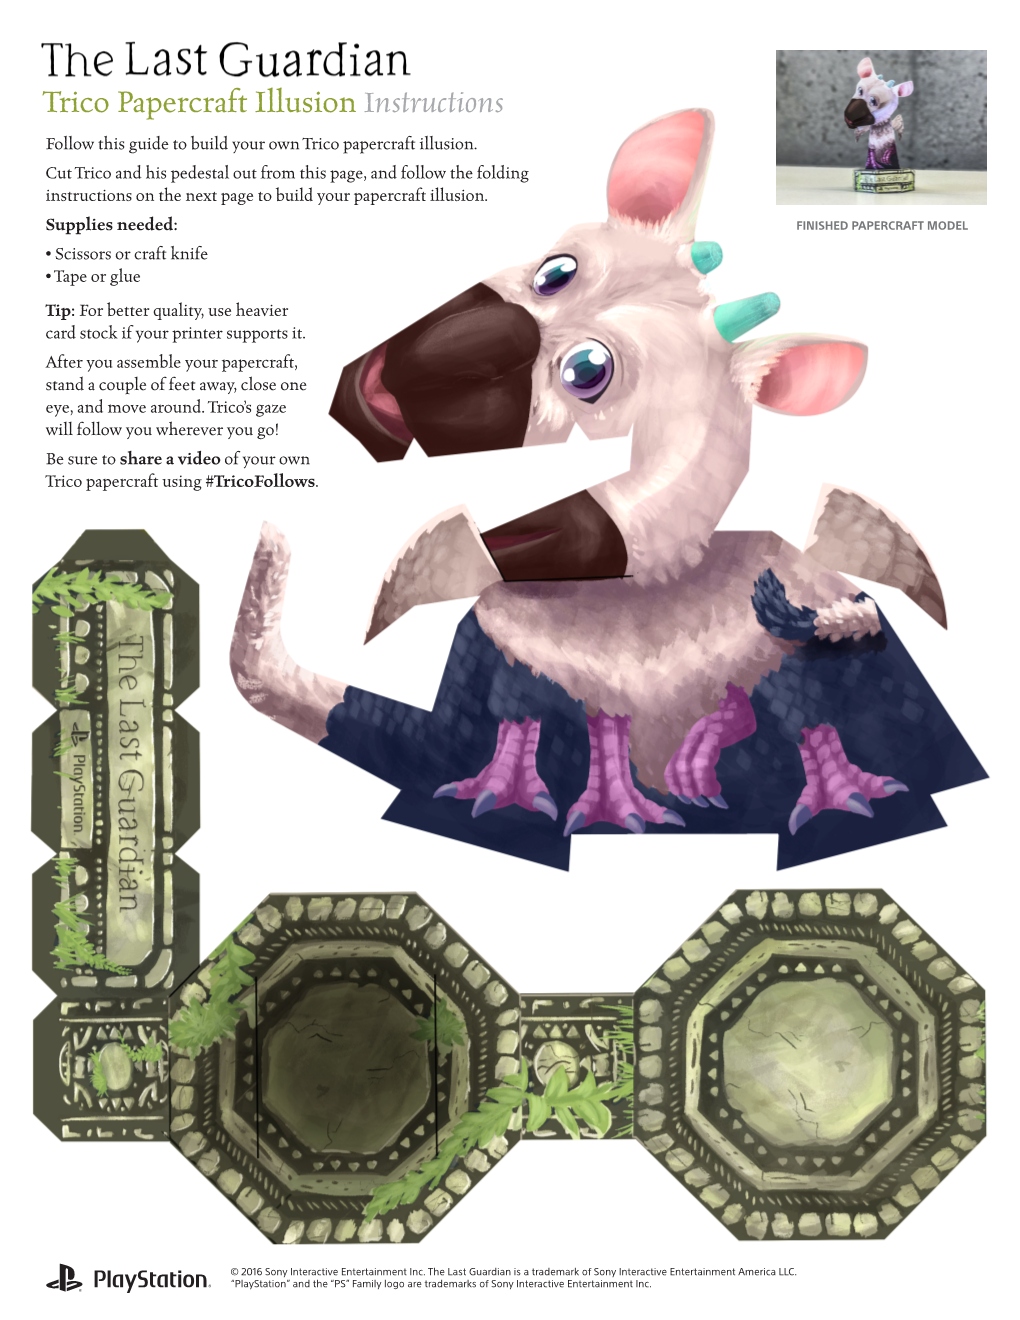 Trico Papercraft Illusion Instructions Follow This Guide to Build Your Own Trico Papercraft Illusion